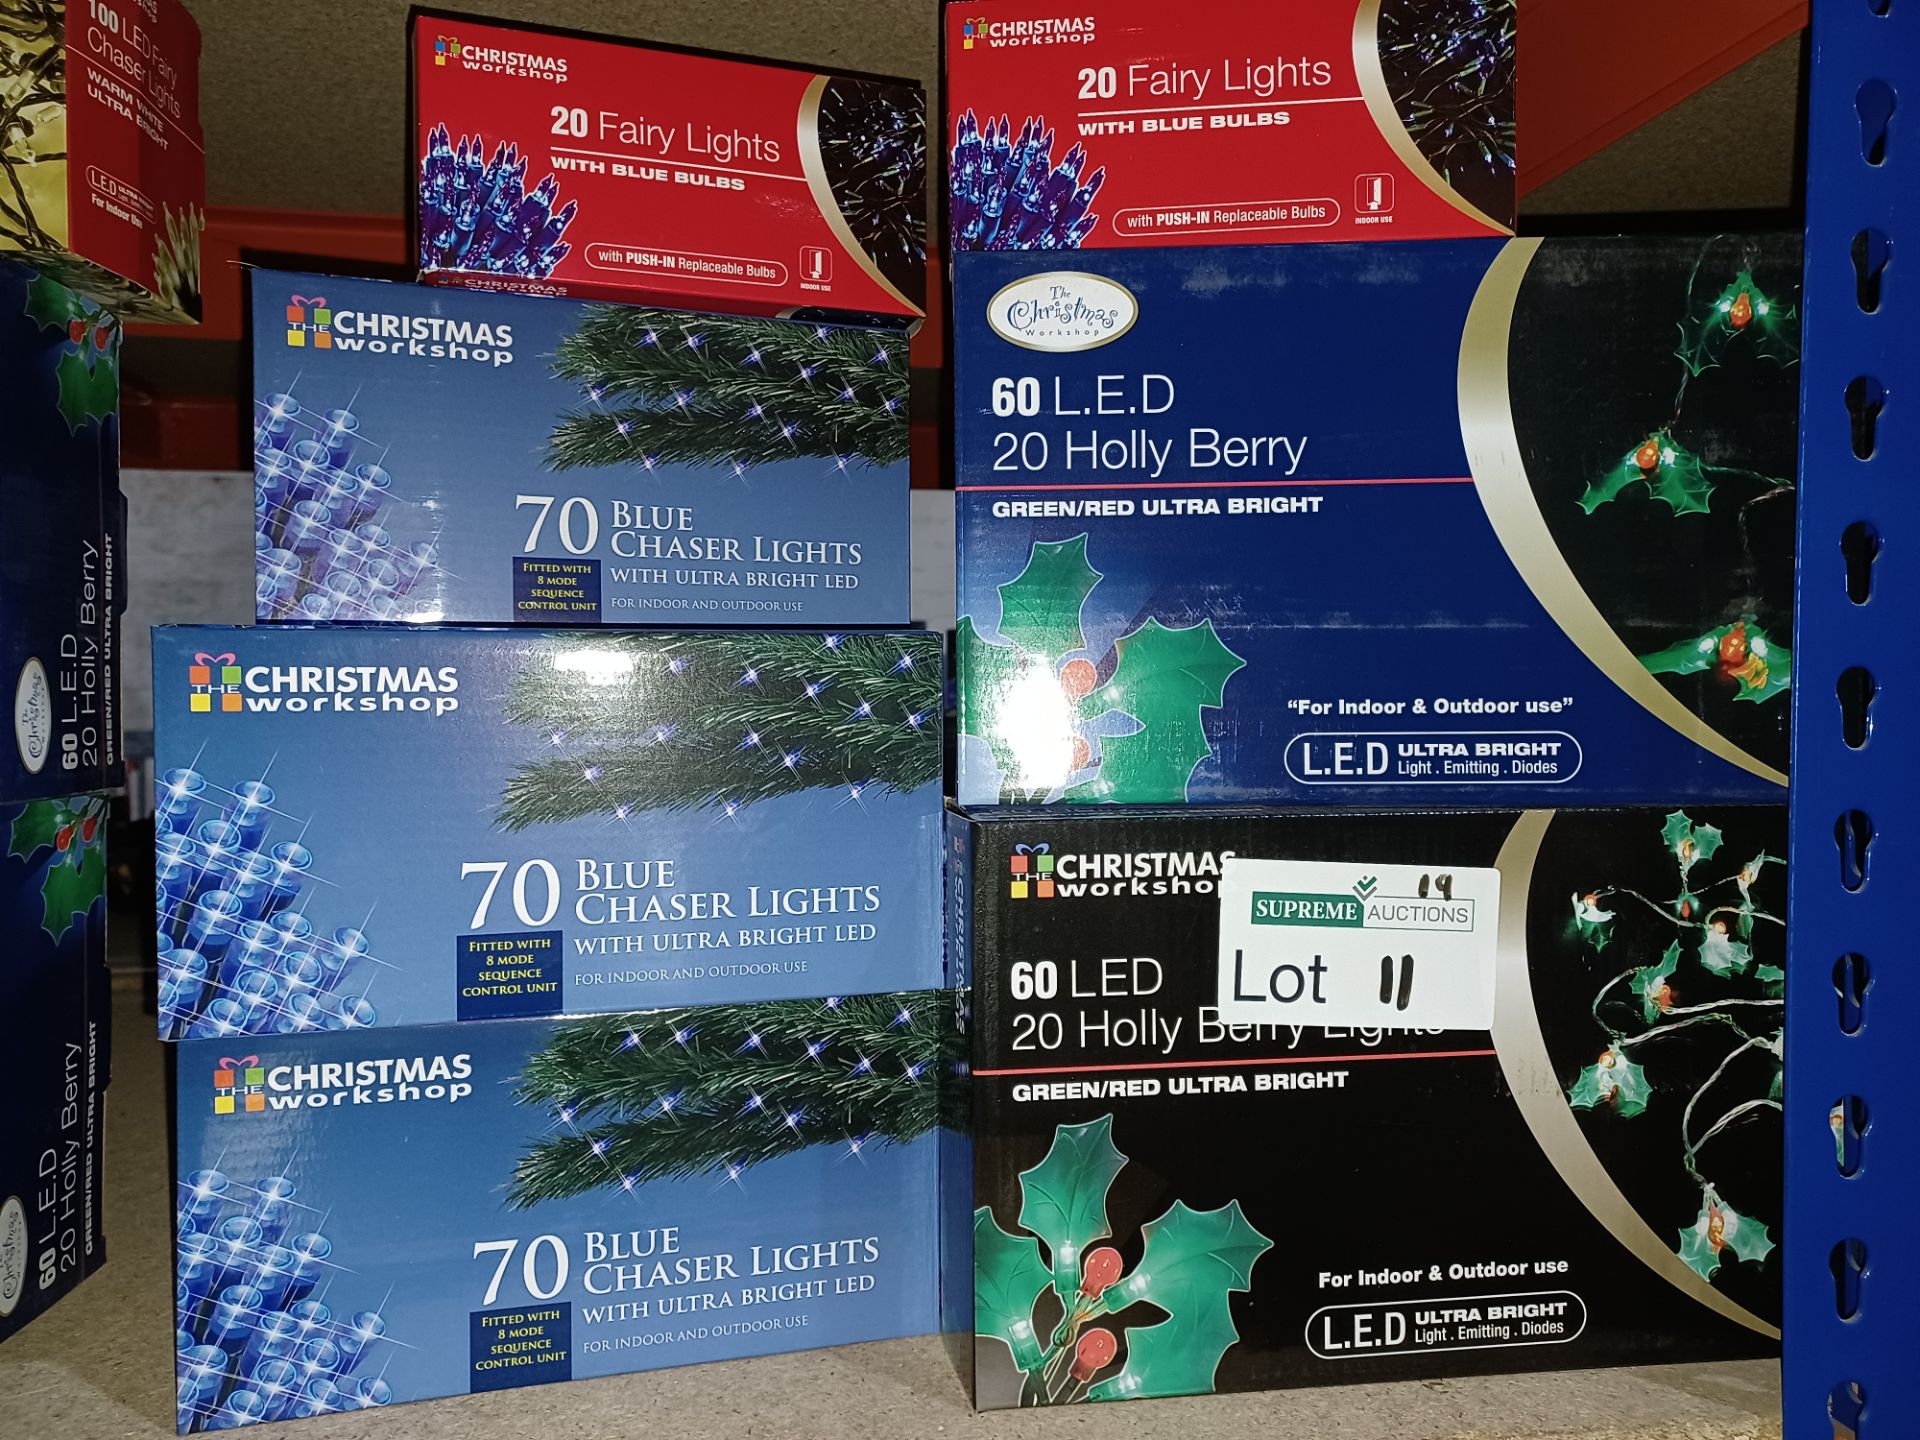 NEW BOXED 15 PIECE MIXED LOT OF CHRISTMAS LIGHTS INCLUDING BLUE CHASER LIGHTS ULTRA BRIGHT LED,